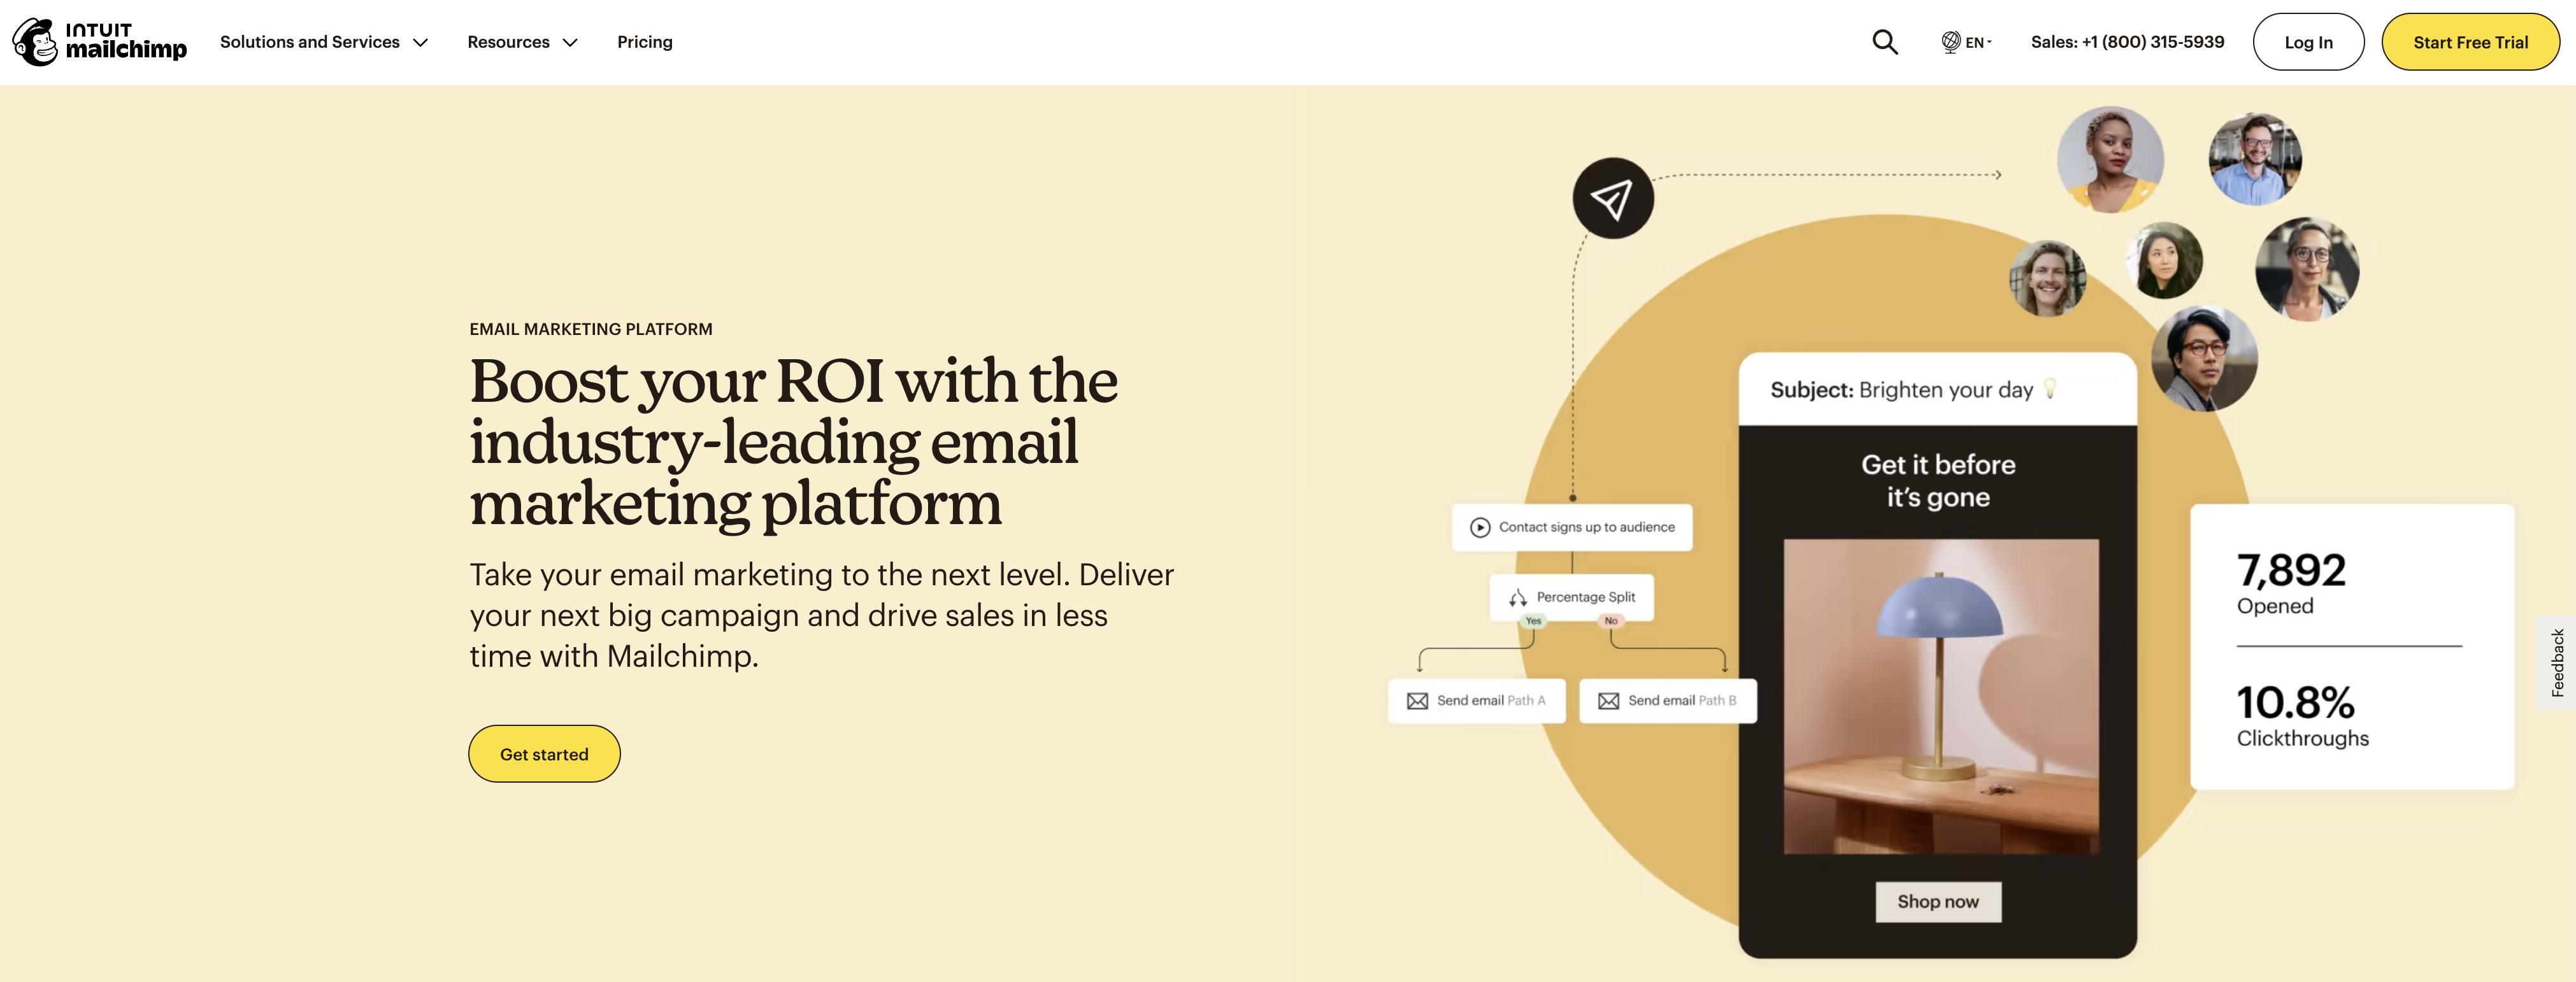 Mailchimp boost your ROI with email marketing